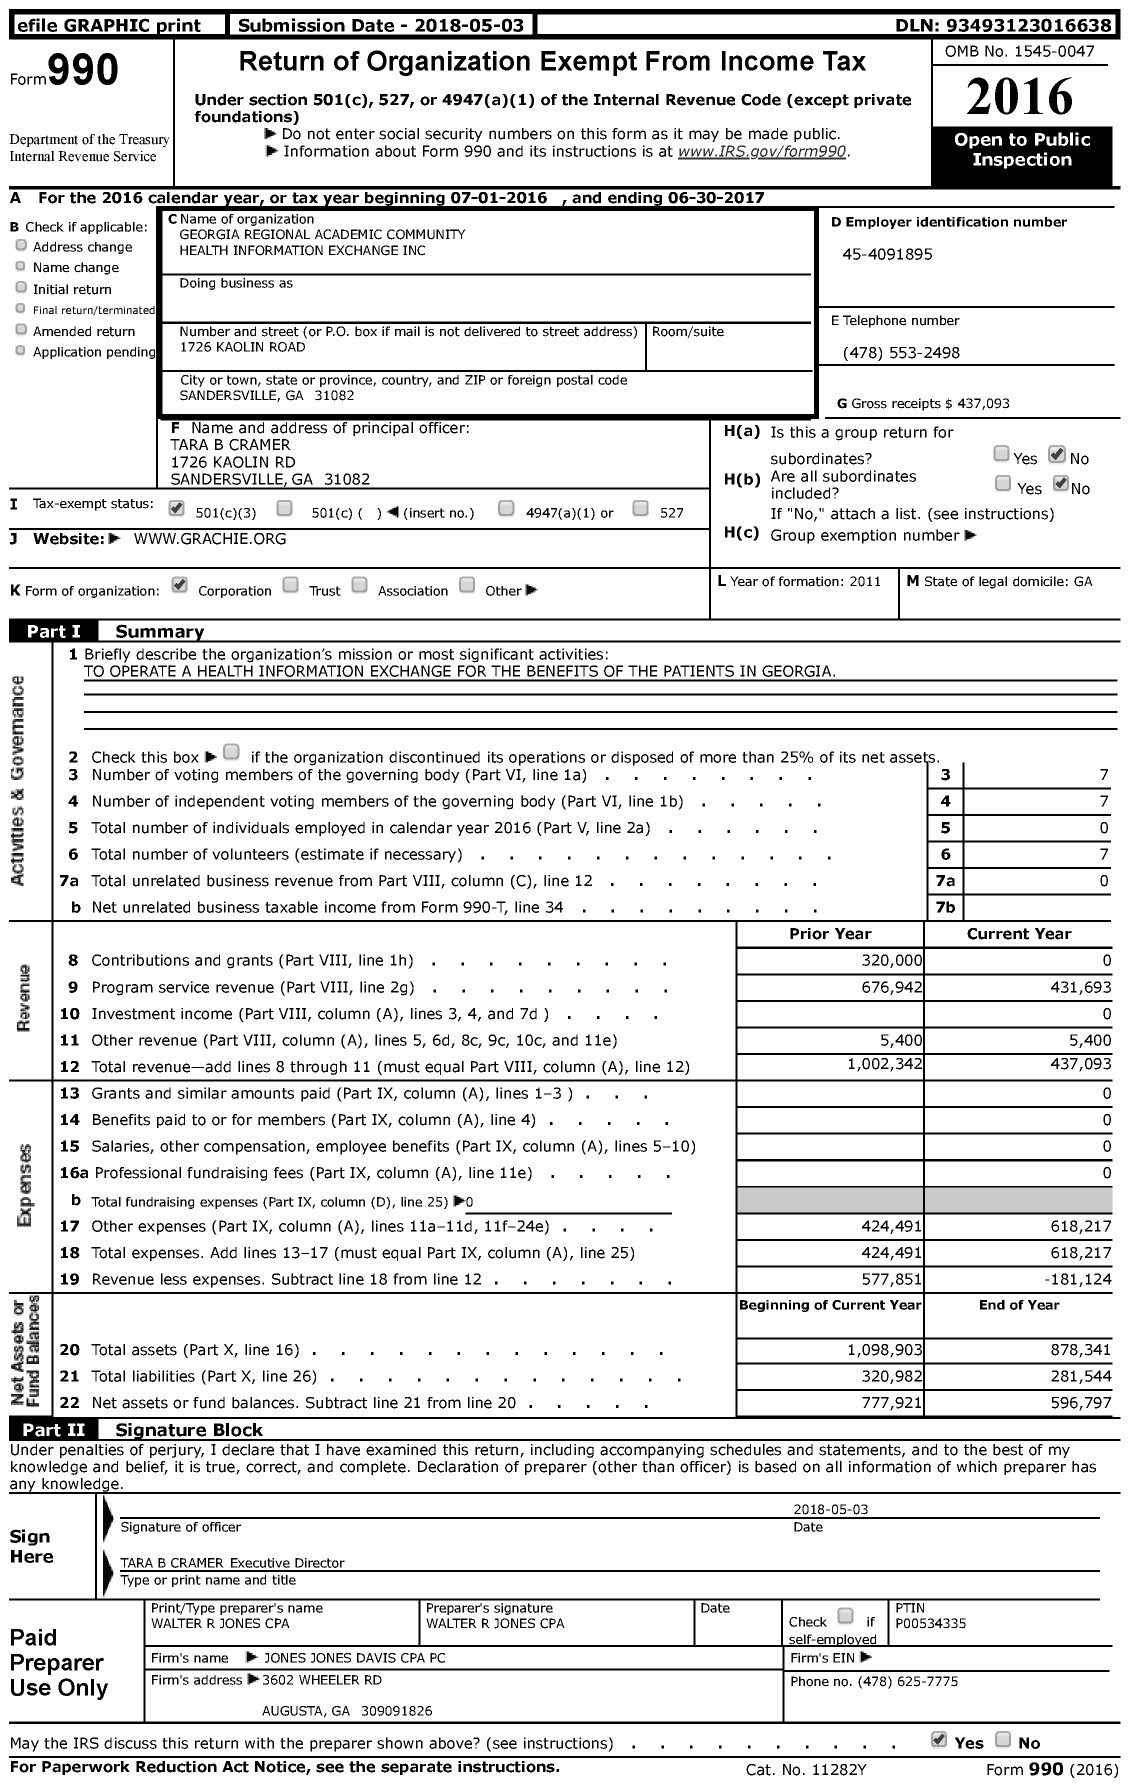 Image of first page of 2016 Form 990 for Georgia Regional Academic Community Health Information Exchange